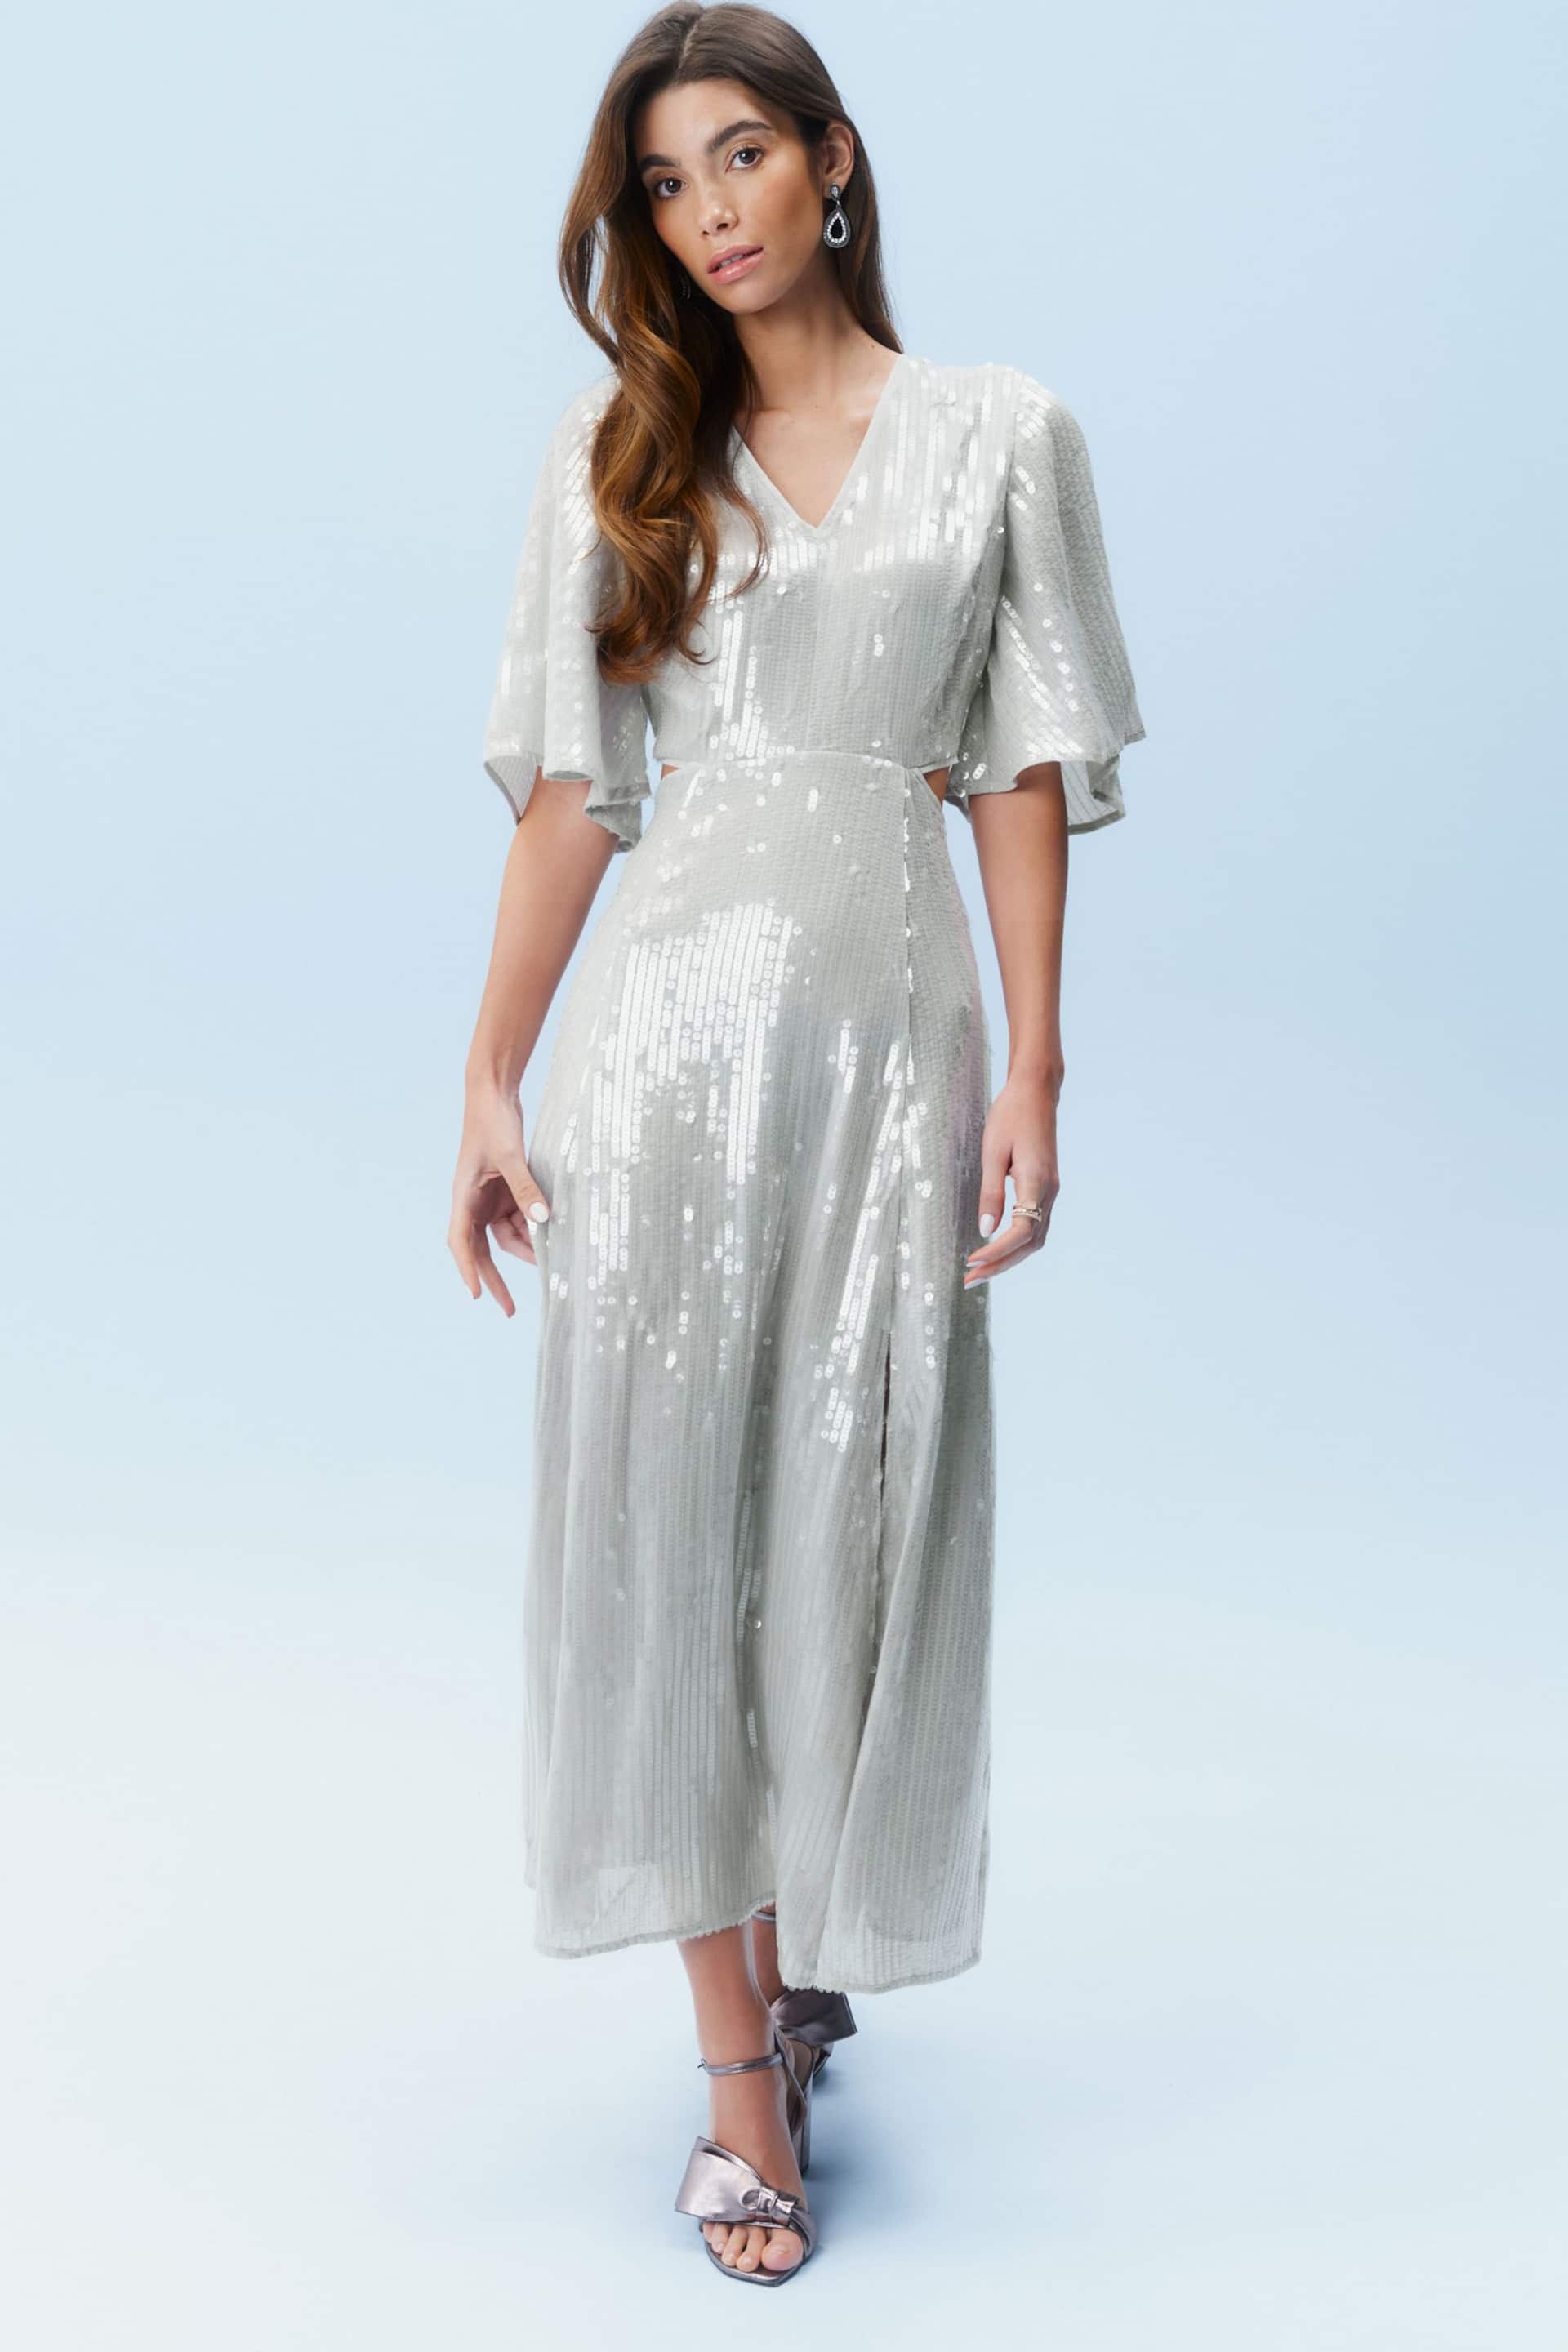 Silver Sequin Flutter Sleeve Maxi Dress - Image 6 of 6